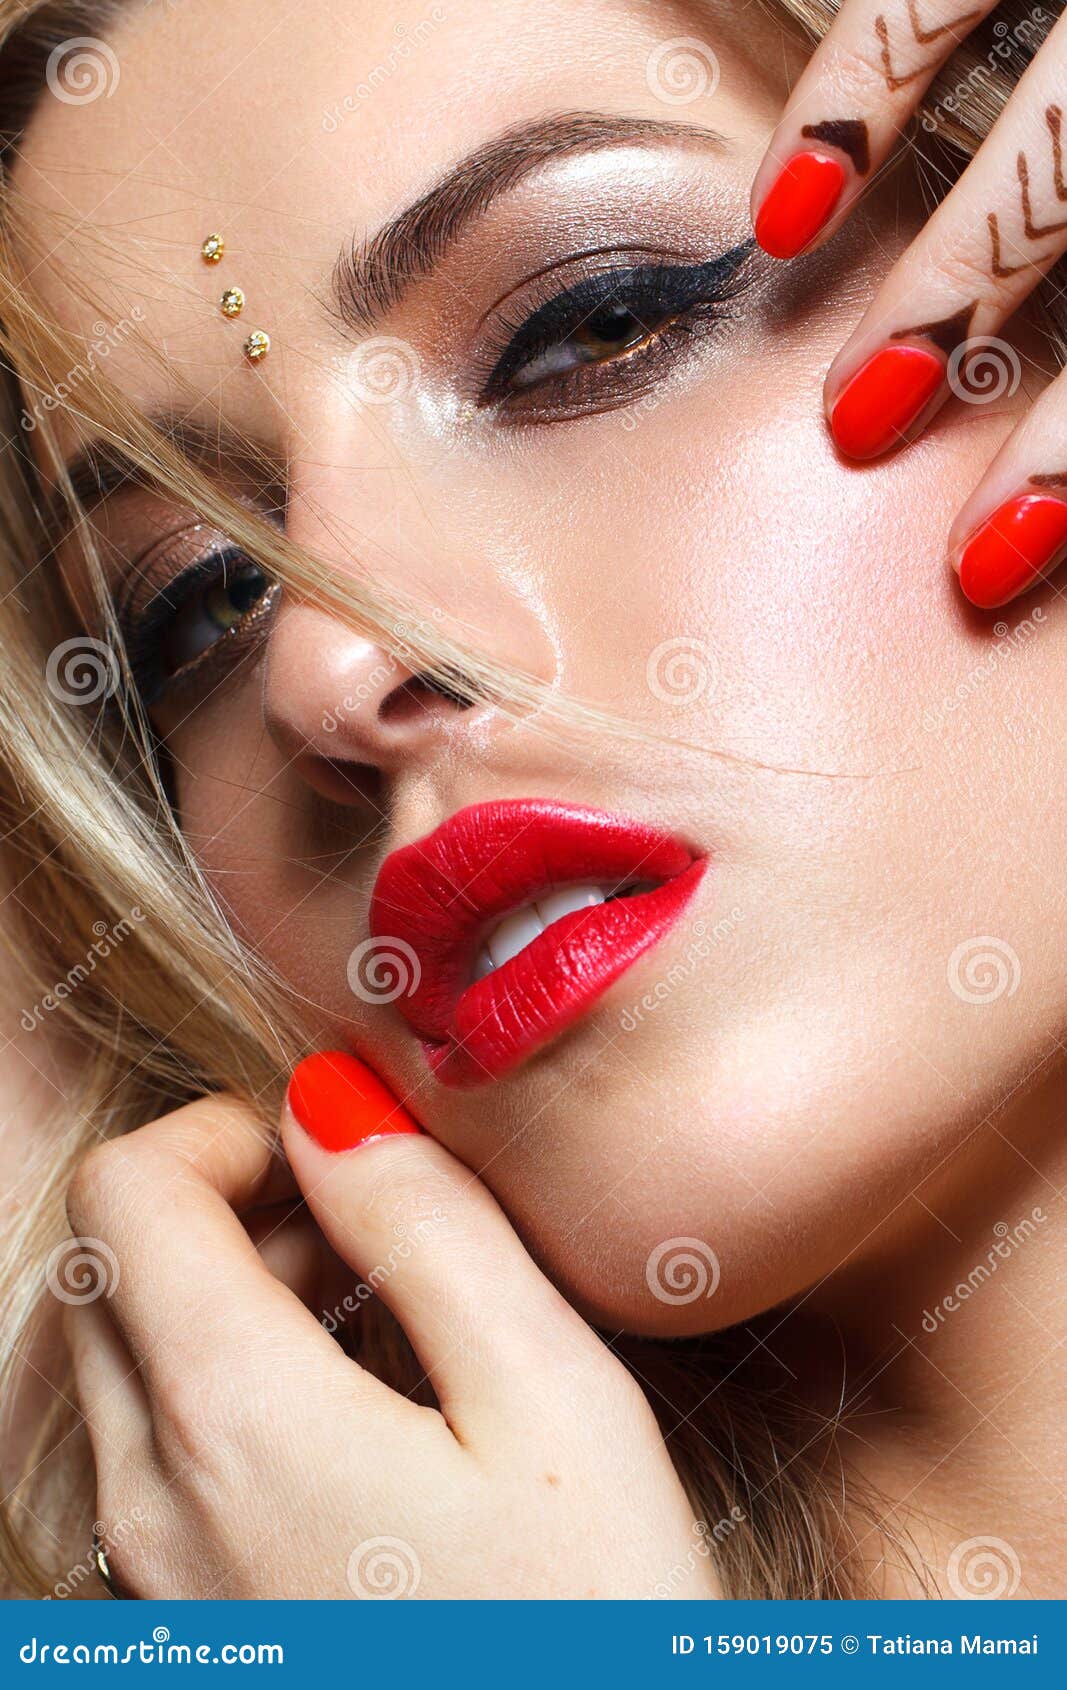 beautiful young woman with a professional colorful make-up, trendy bindi on her forehead.